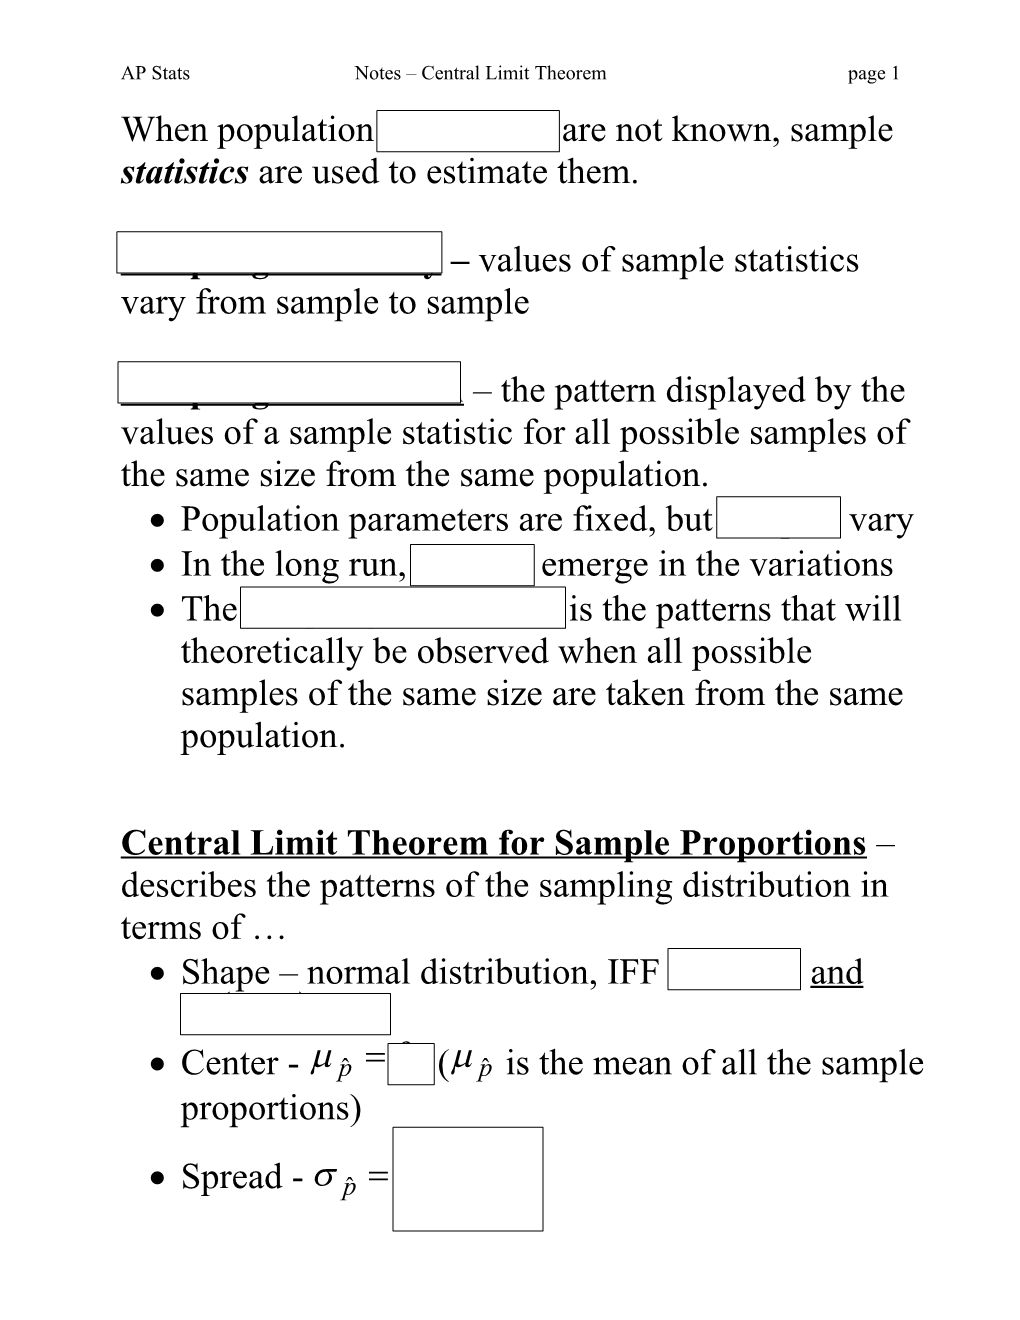 When Population Parameters Are Not Known, Sample Statistics Are Used to Estimate Them